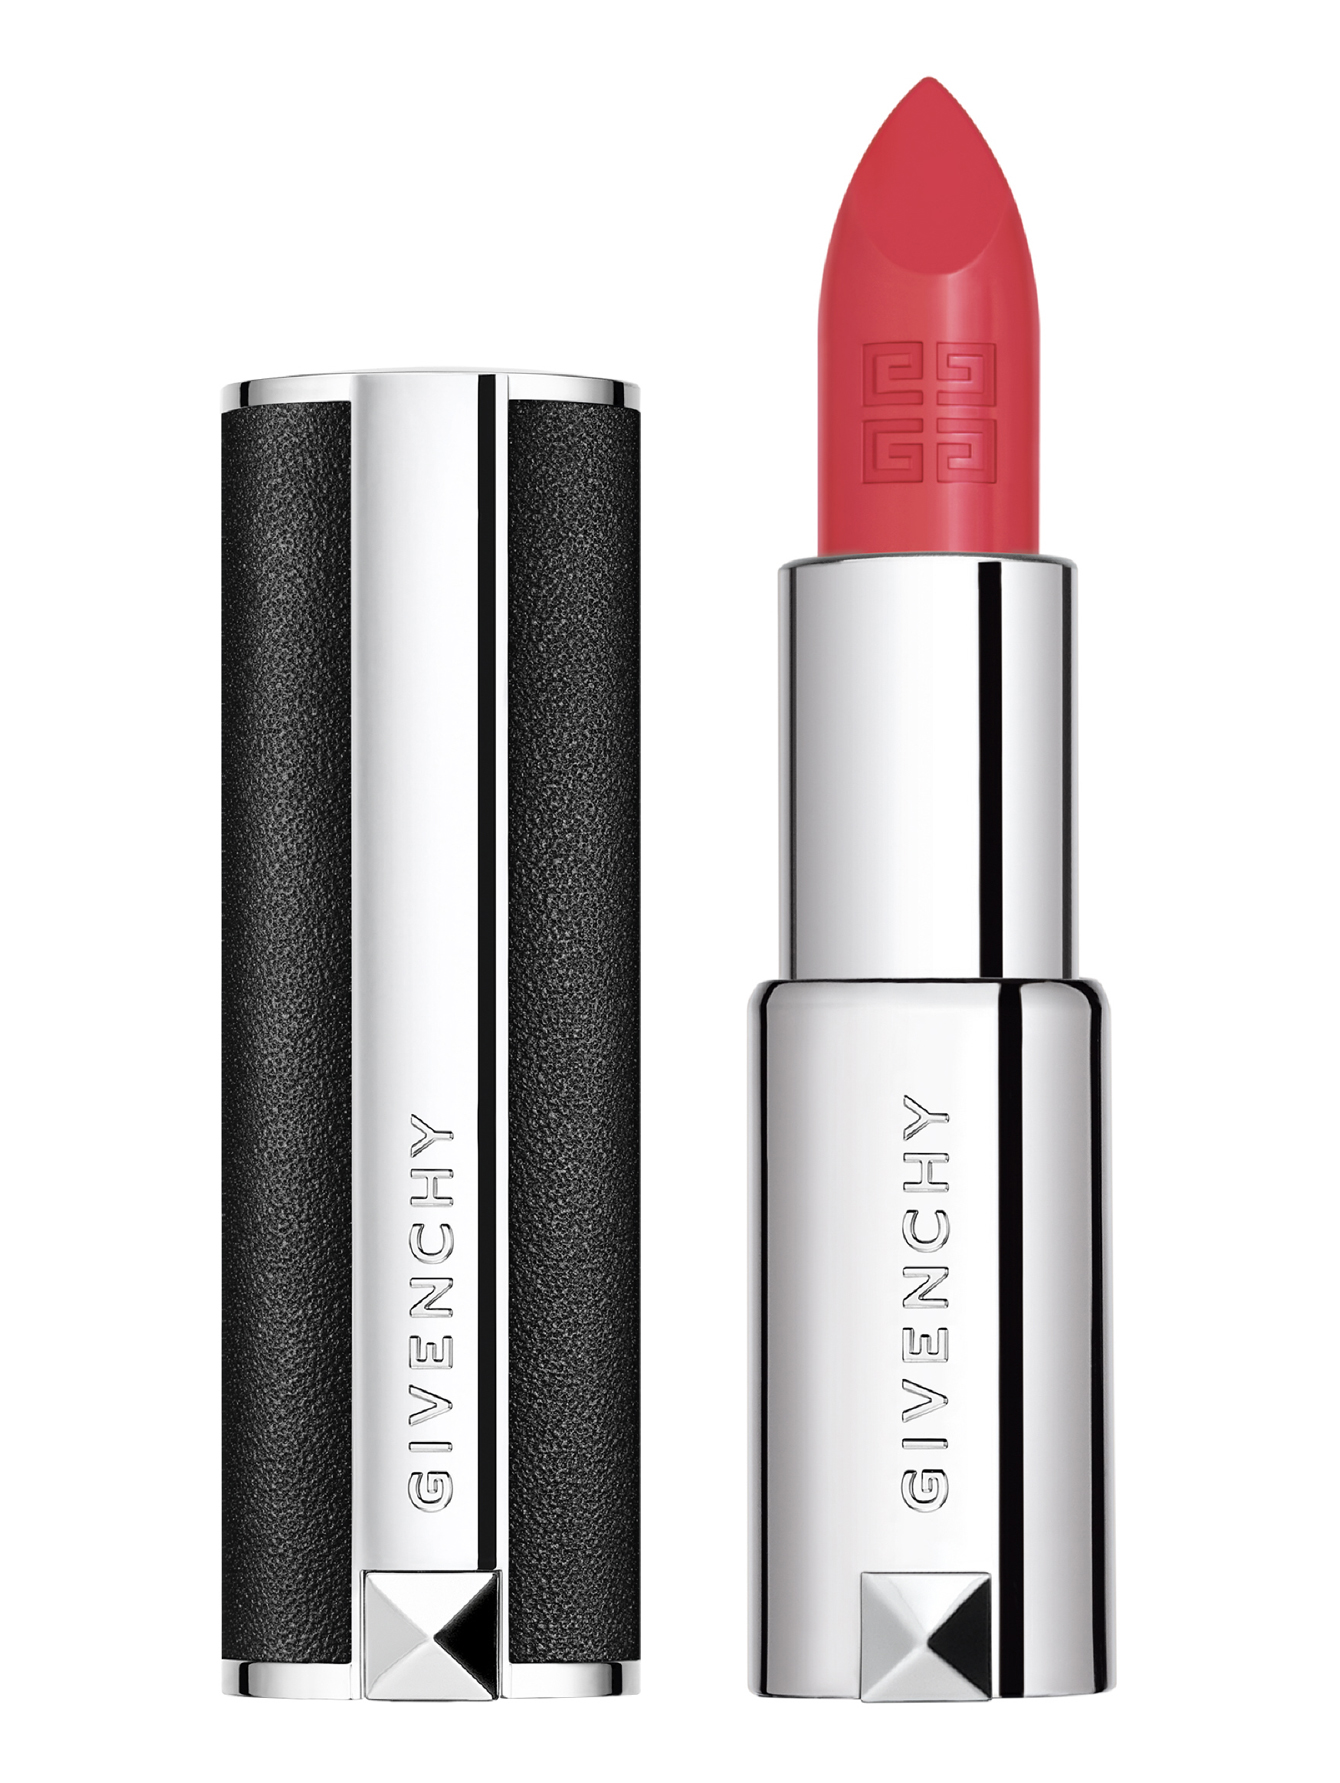 Губная помада givenchy. Givenchy помада Sheer Velvet. Помада Givenchy le rouge. 218 Губная помада Givenchy le rouge. Помада Givenchy le rouge 202.